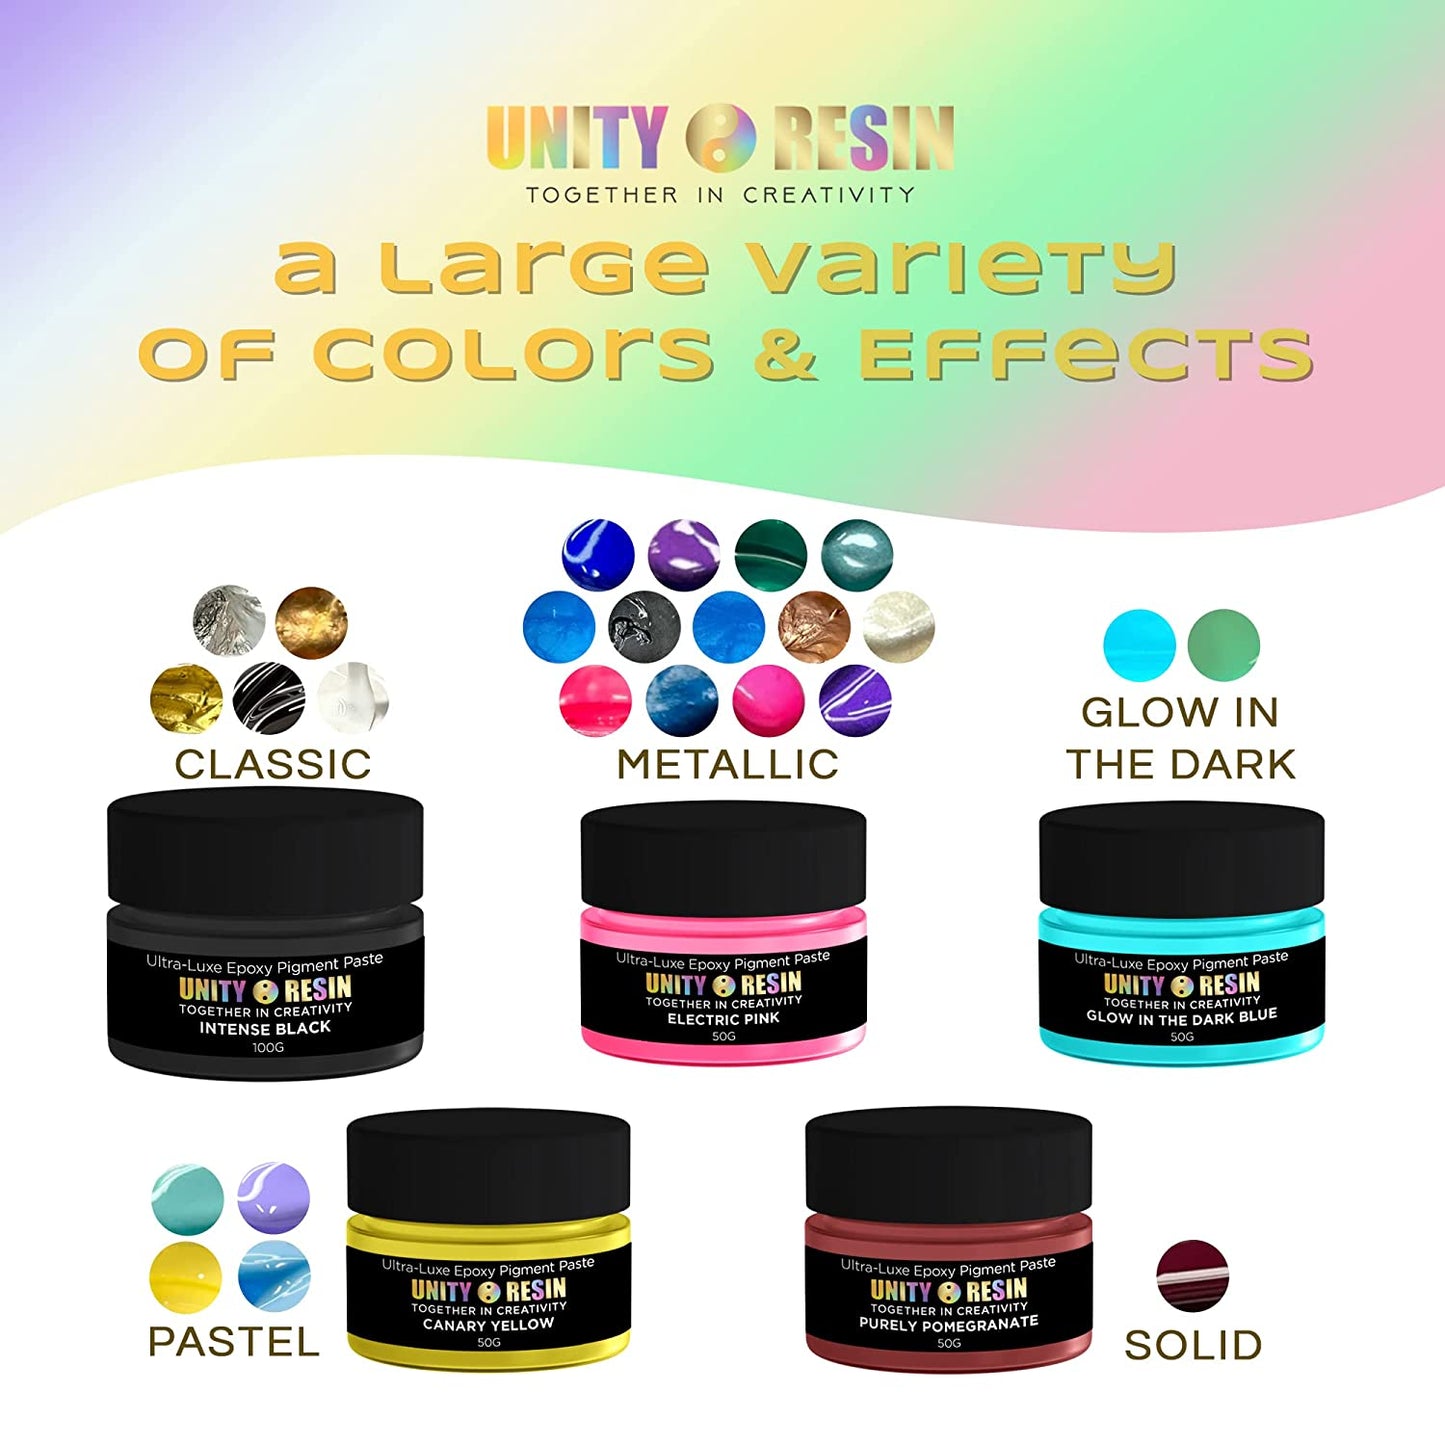 Ultra-Luxe Epoxy Resin Pigment Paste- PLUSH PINK (50G).